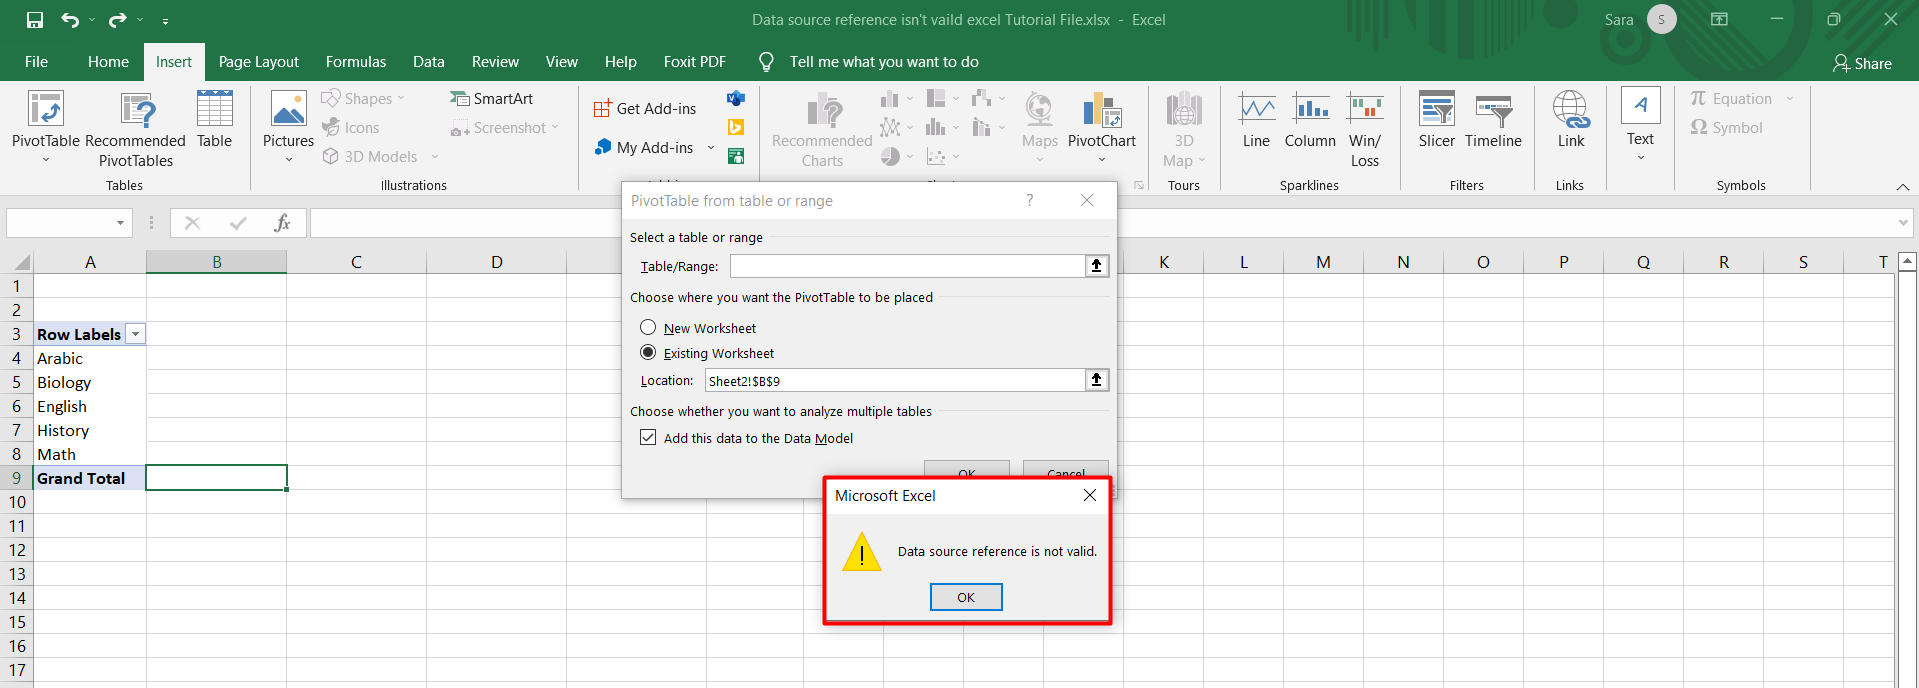 A Reference Isn'T Valid Excel Error